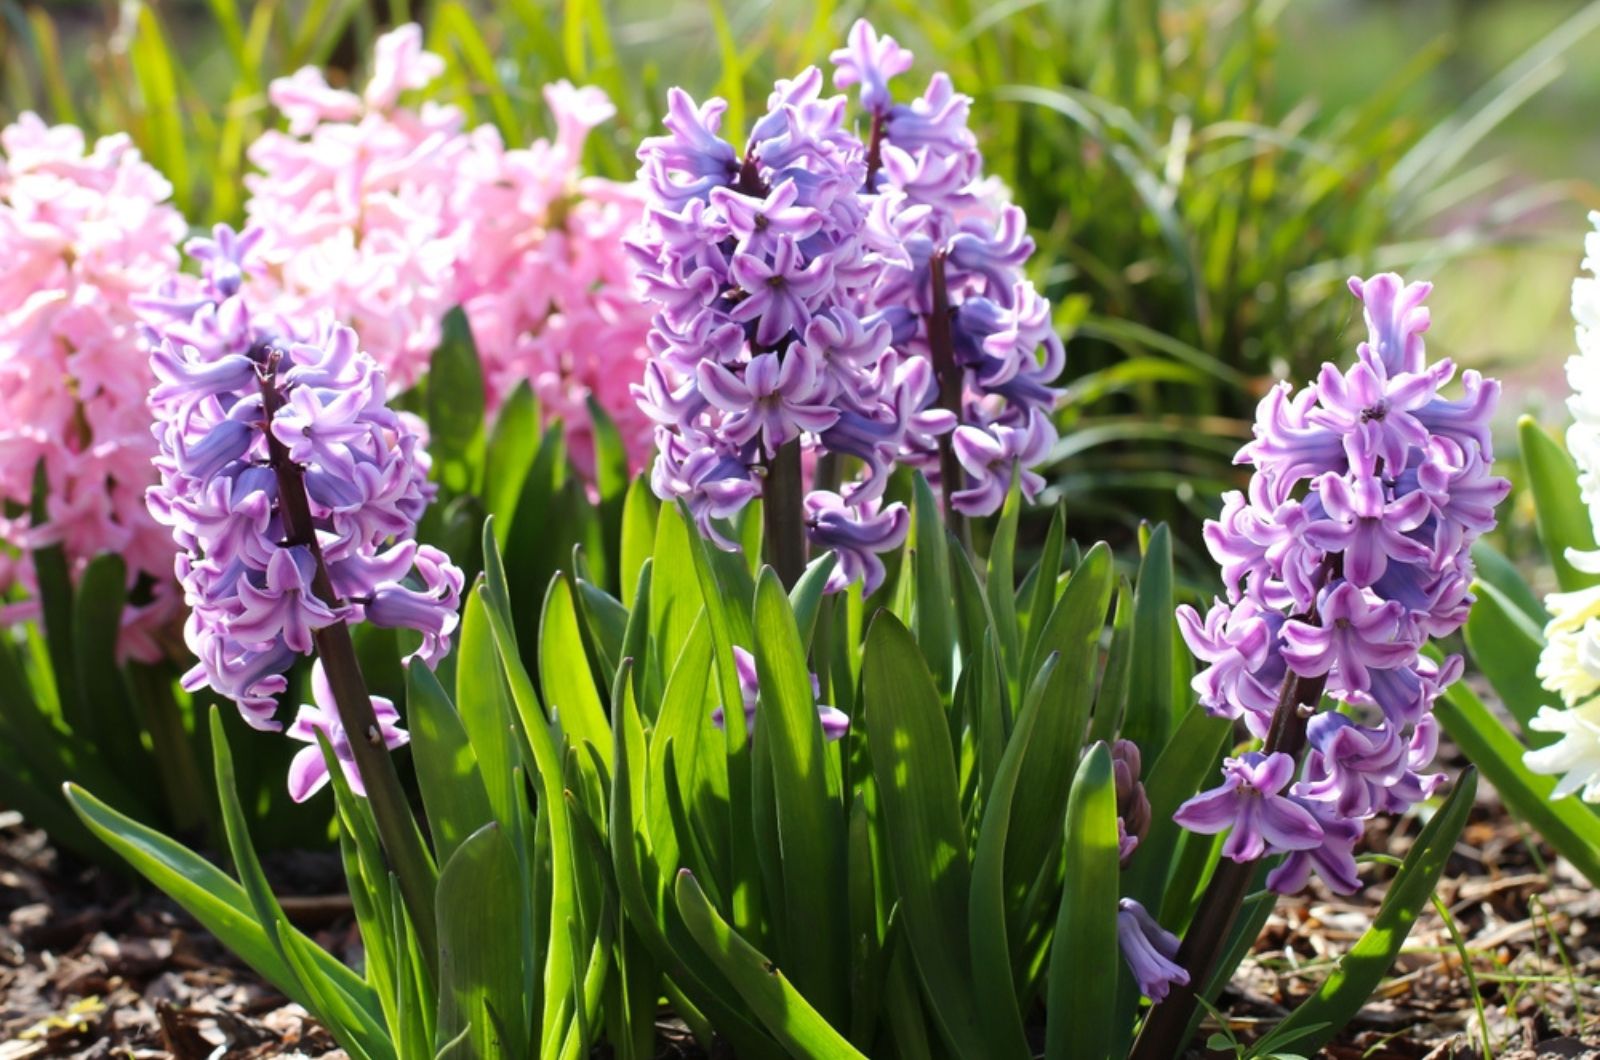 Hyacinths in the sunlight